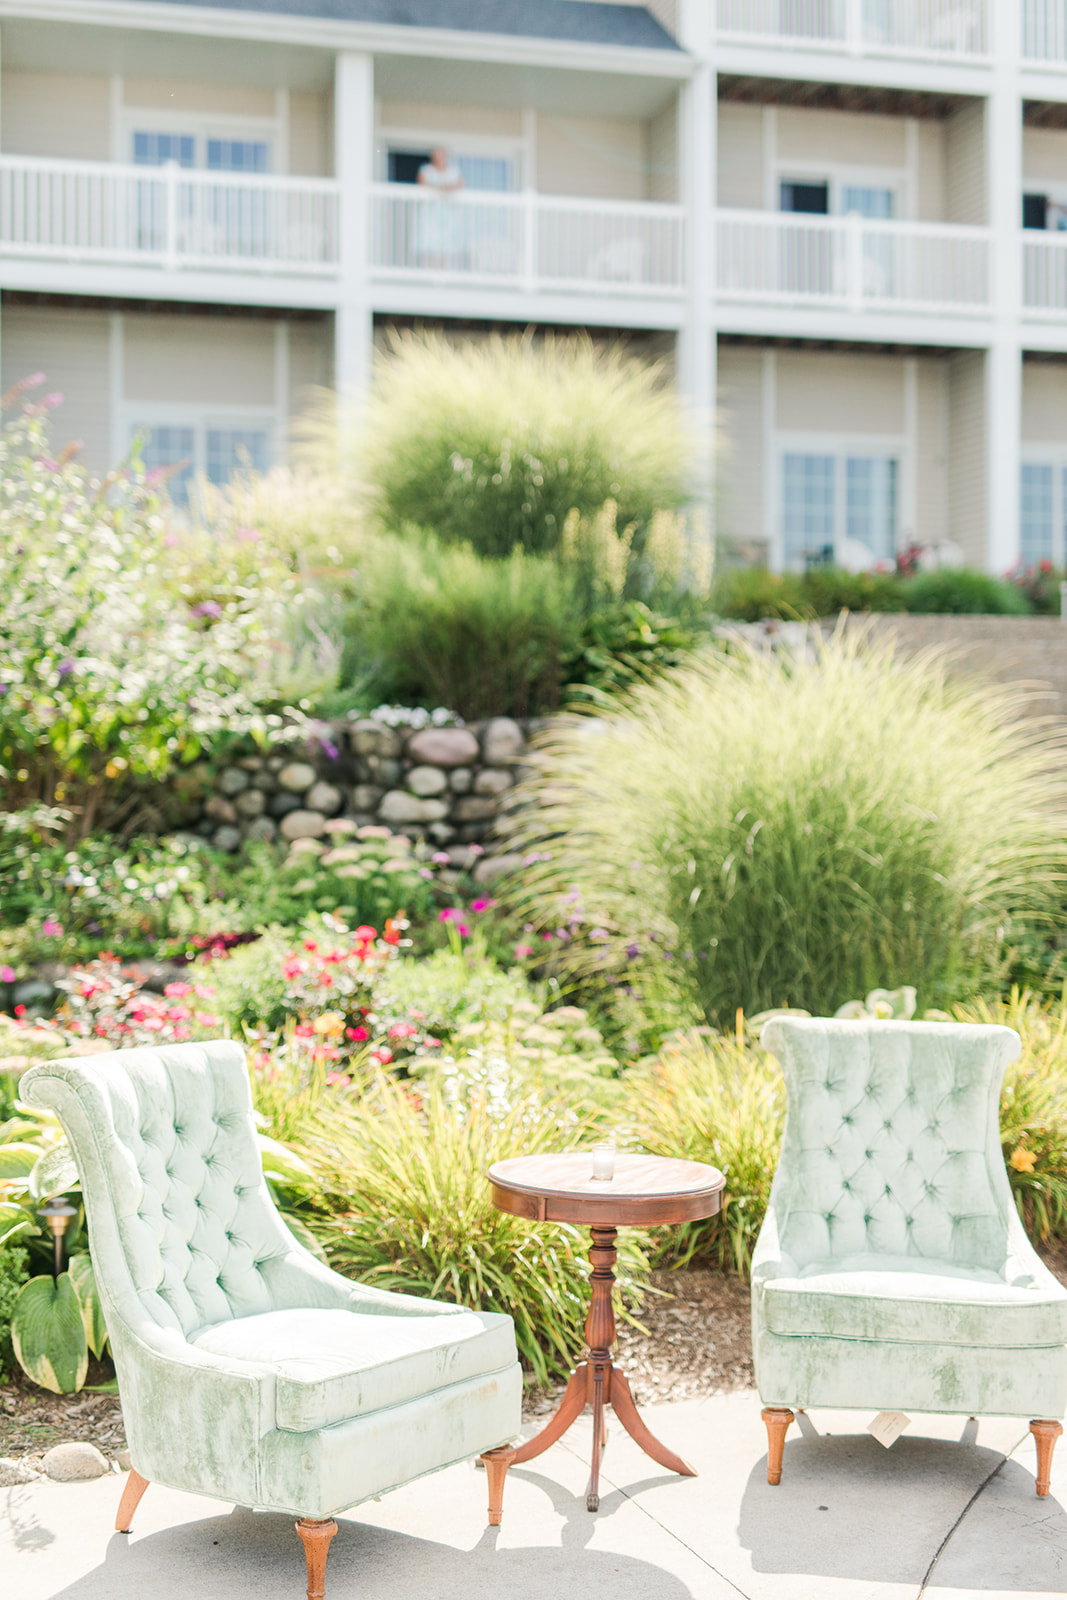 Vintage soft seating during a Bay Pointe Inn wedding in Shelbyville, Michigan